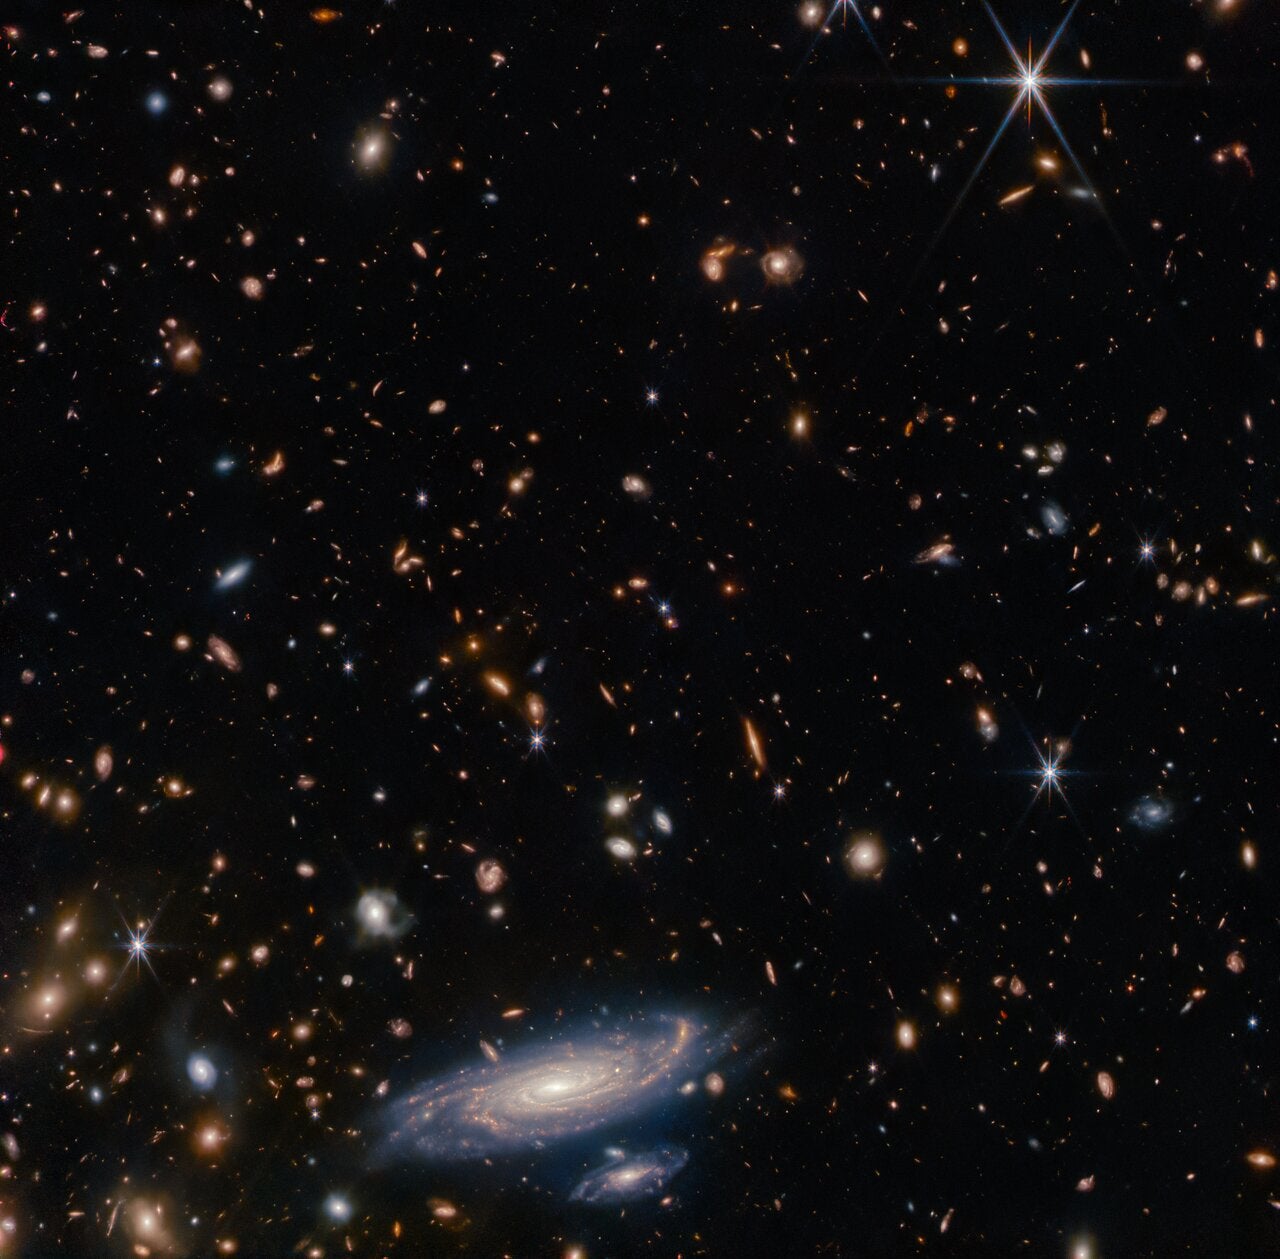 This image displays a wider view of the field of stars and galaxies surrounding the spiral galaxy LEDA 2046648. Webb’s NIRCam instrument has picked out a profusion of smaller, more distant galaxies and bright stars around this galaxy, demonstrating the telescope’s impressive resolution in infrared wavelengths. Calibration images such as this one were critical to verify the telescope’s capabilities as it was prepared for science operations, and this one doesn’t disappoint.  [Image description: Many stars and galaxies lie on a dark background, in a variety of colours but mostly shades of orange. Some galaxies are large enough to make out spiral arms. Along the bottom of the frame is a large, detailed spiral galaxy seen at an oblique angle, with another galaxy about one-quarter the size just beneath it. Both have a brightly glowing core, and areas of star formation which light up their spiral arms.]